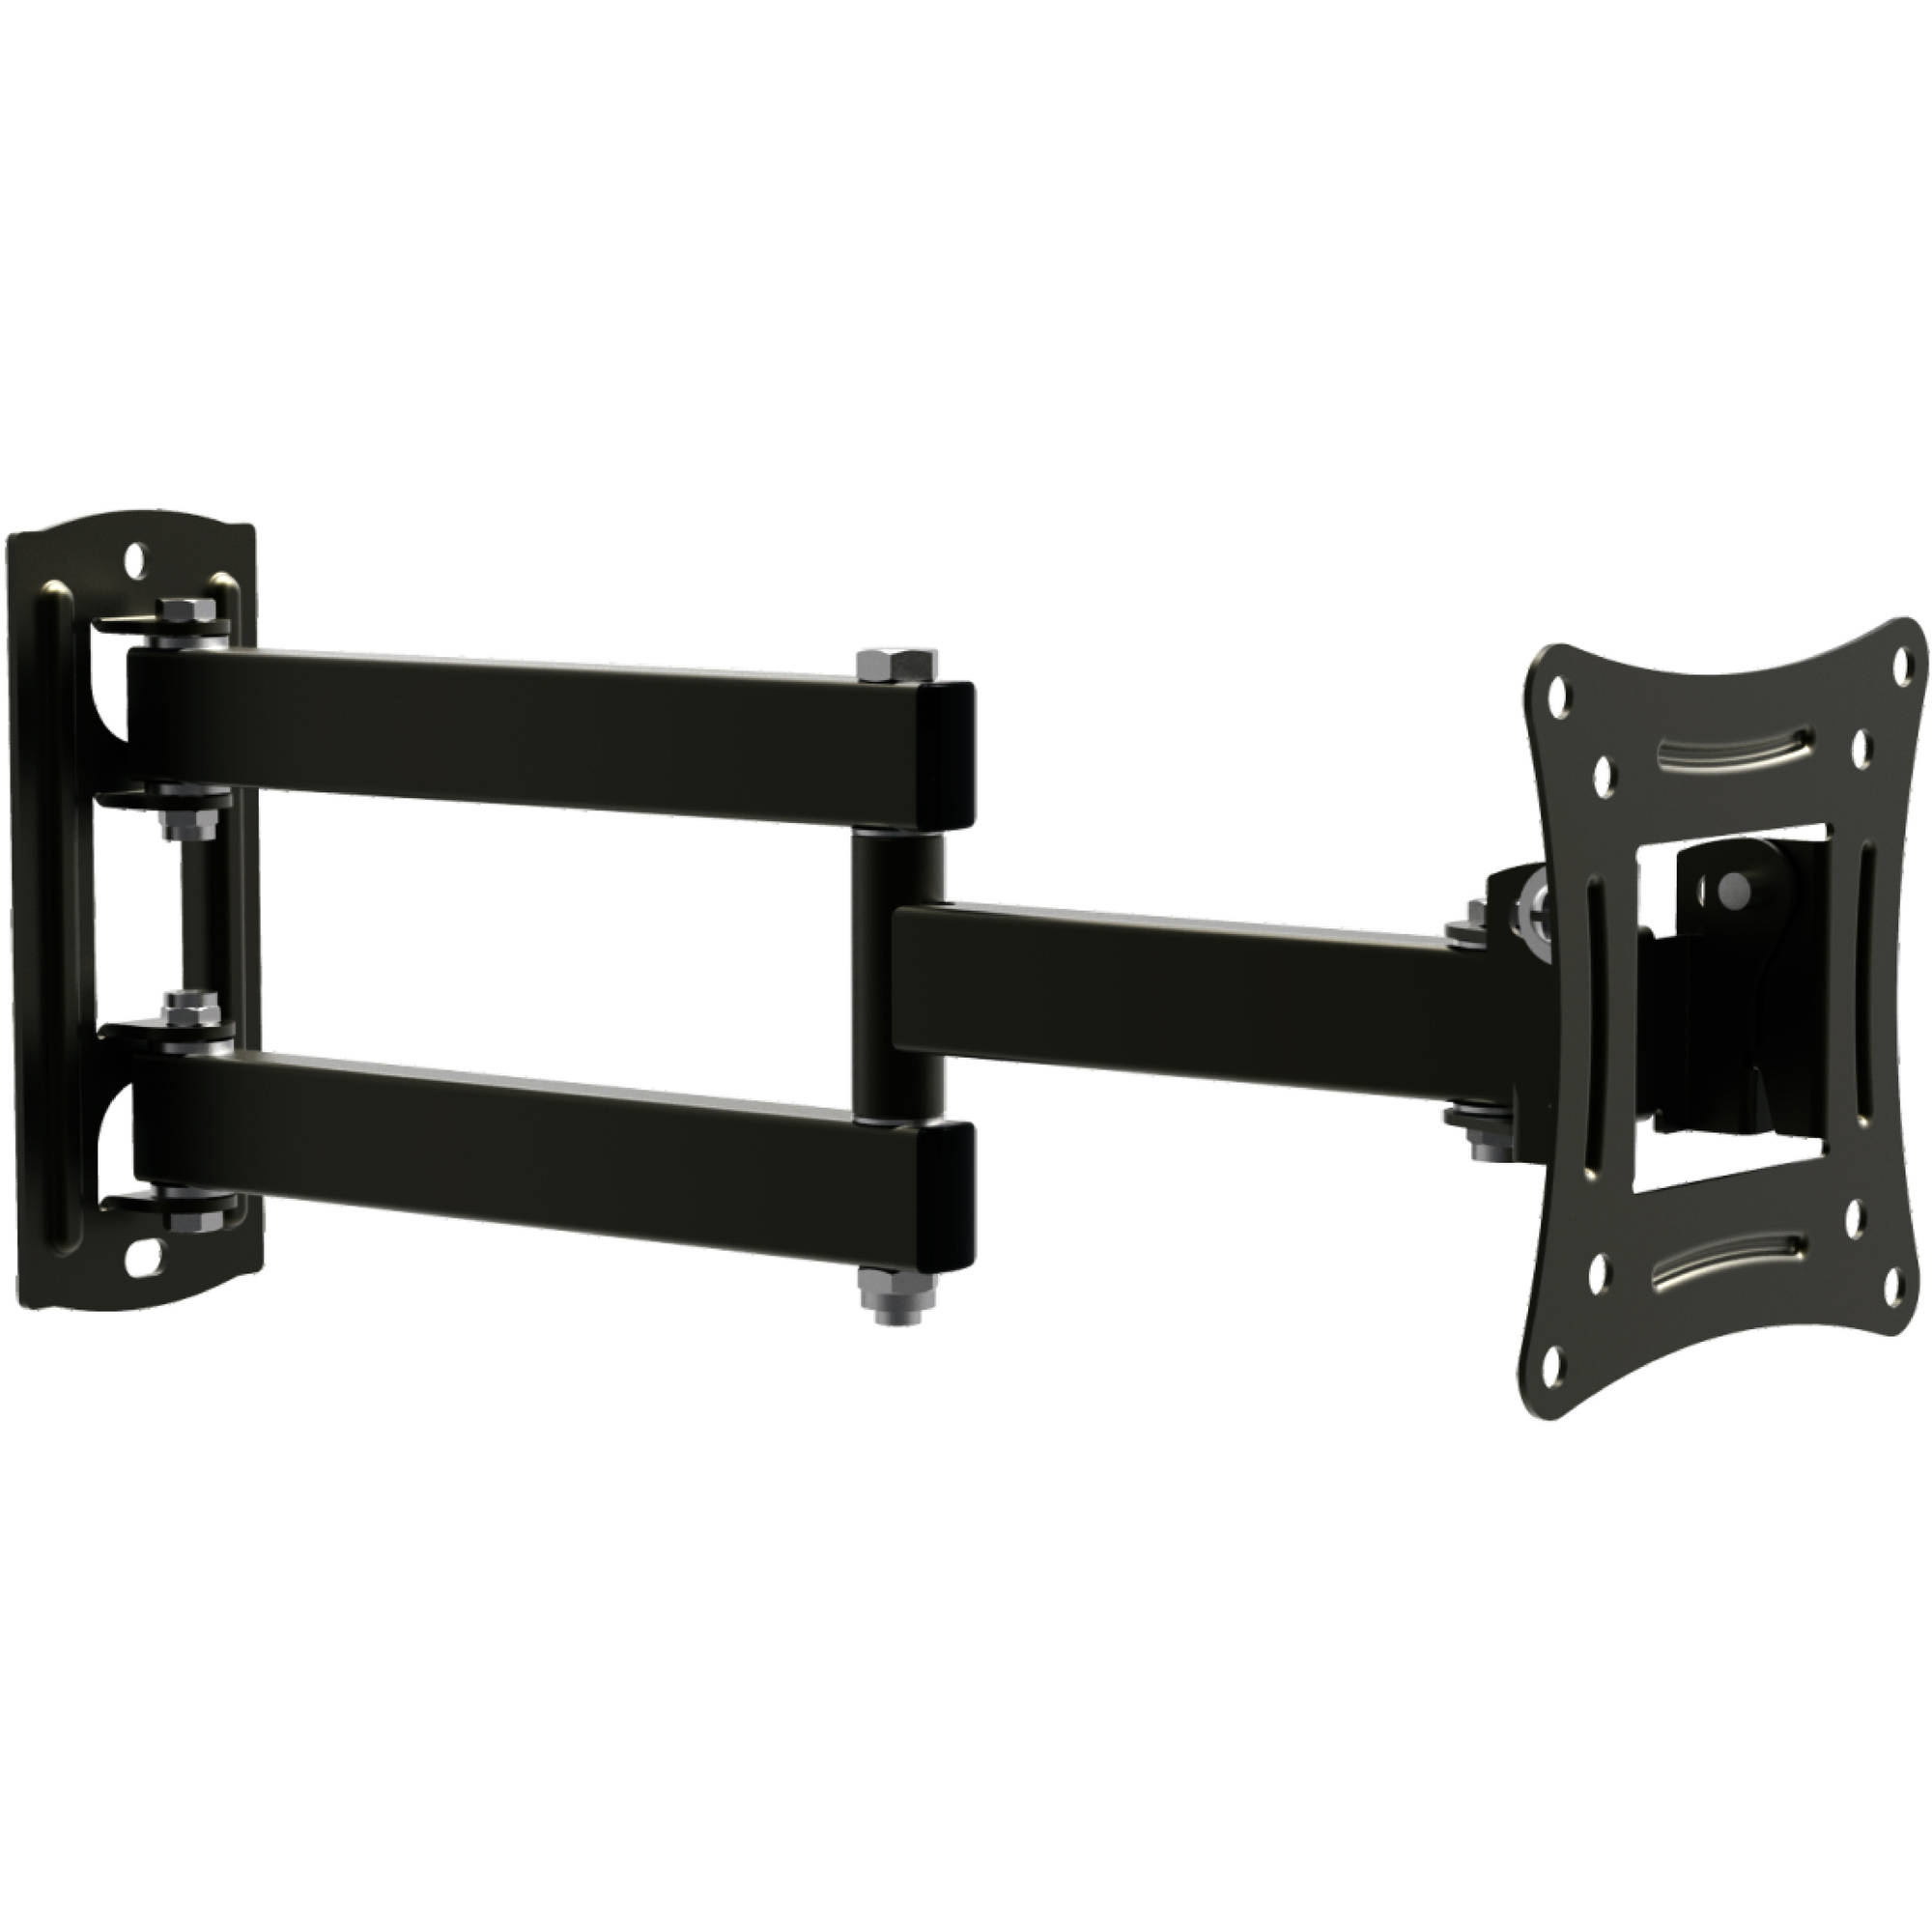 Ematic TV Wall Mount Kit for 10"-27" TVs up to 44 Pounds with HDMI Cable EMW2301 - image 1 of 6